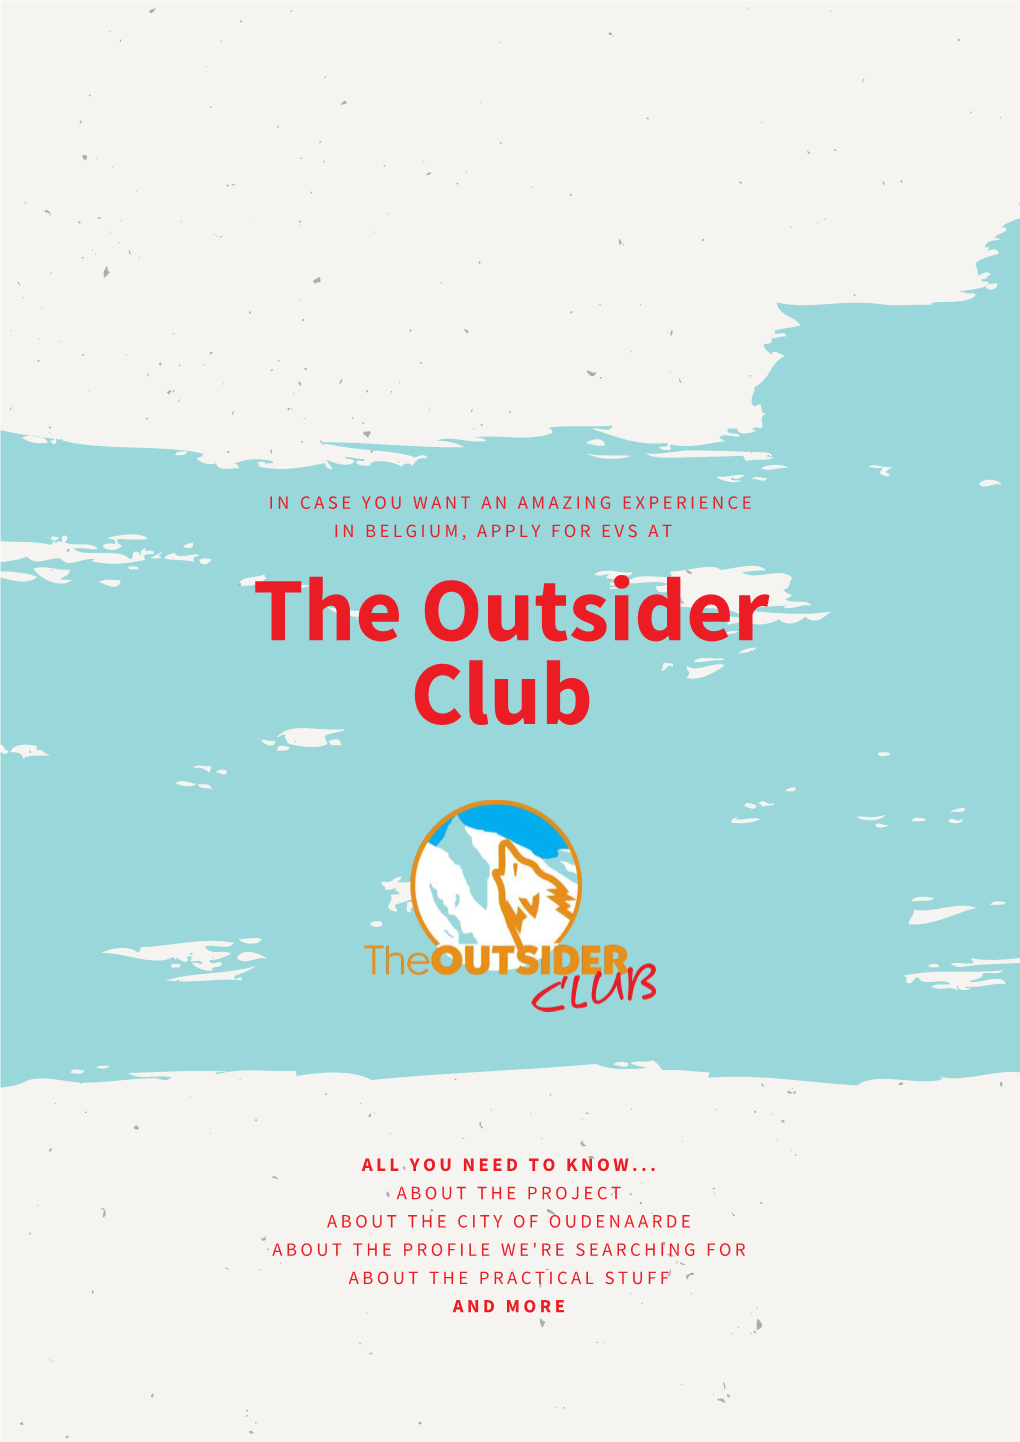 The Outsider Club